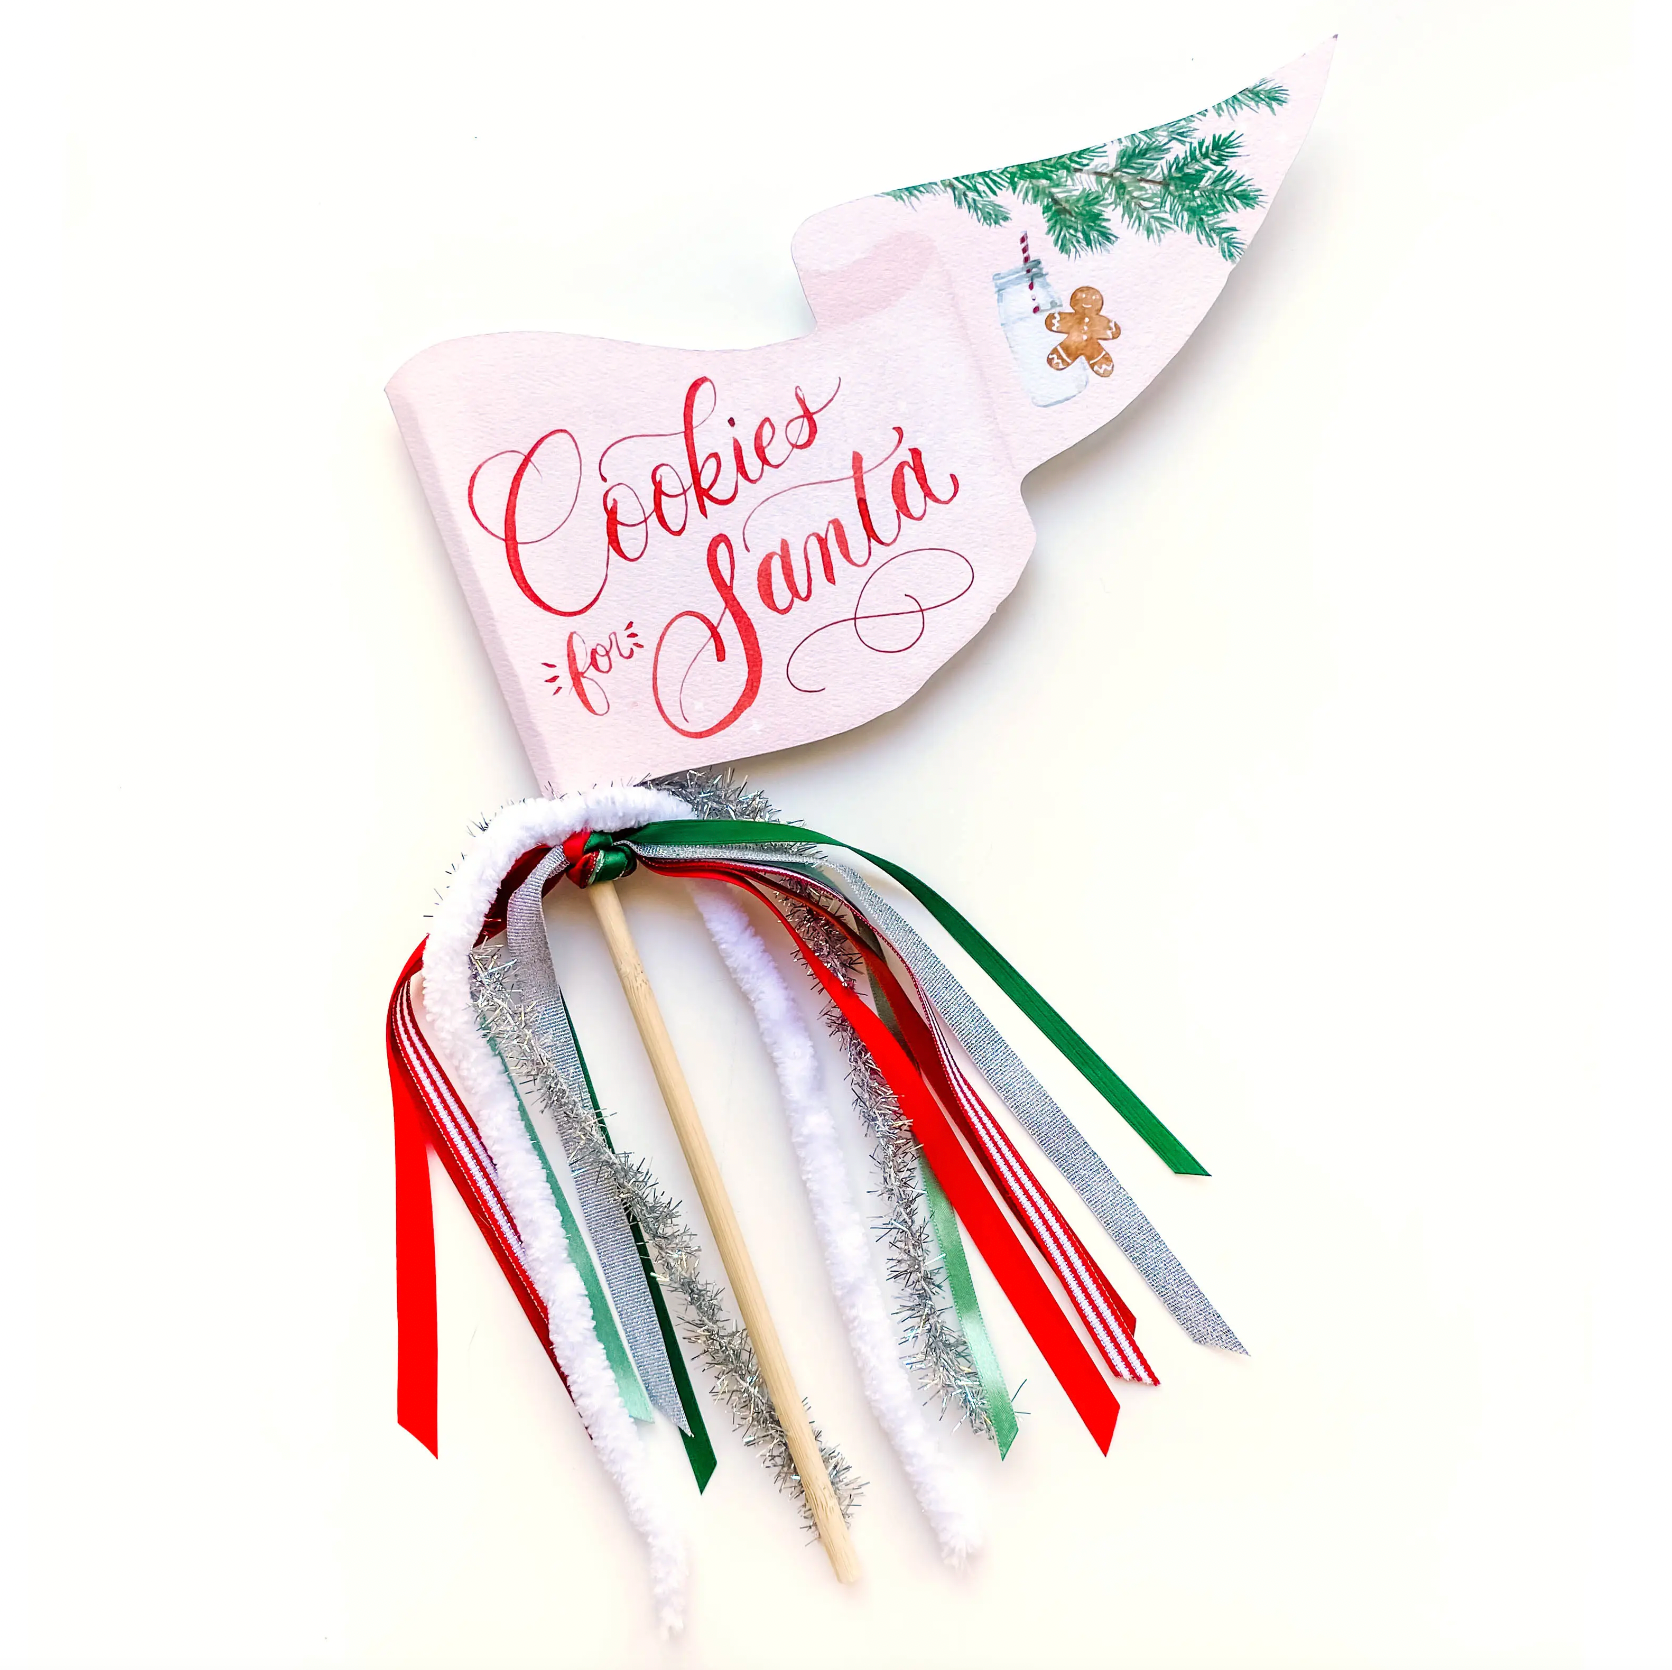 Cookies for Santa Party Pennant